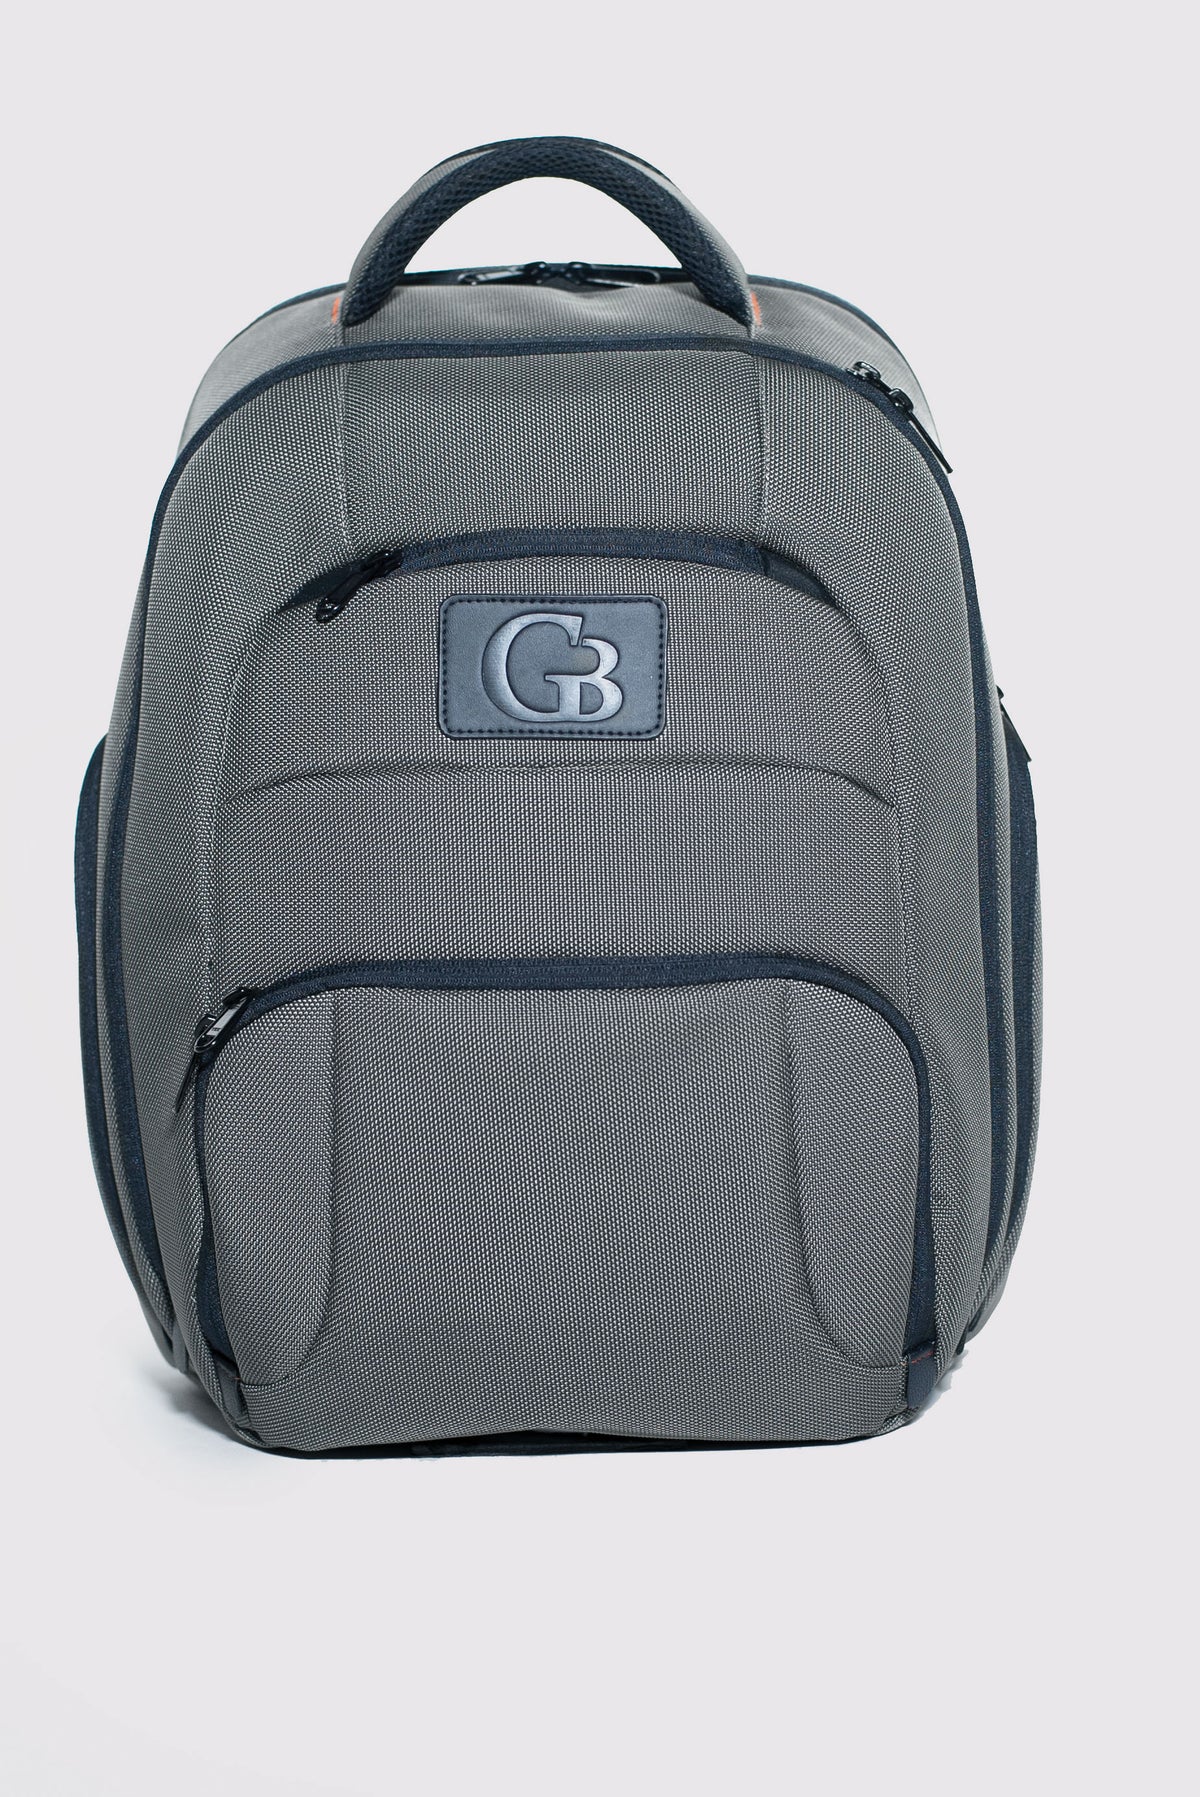 Gray Galway Bay Sports and Laptop Backpack